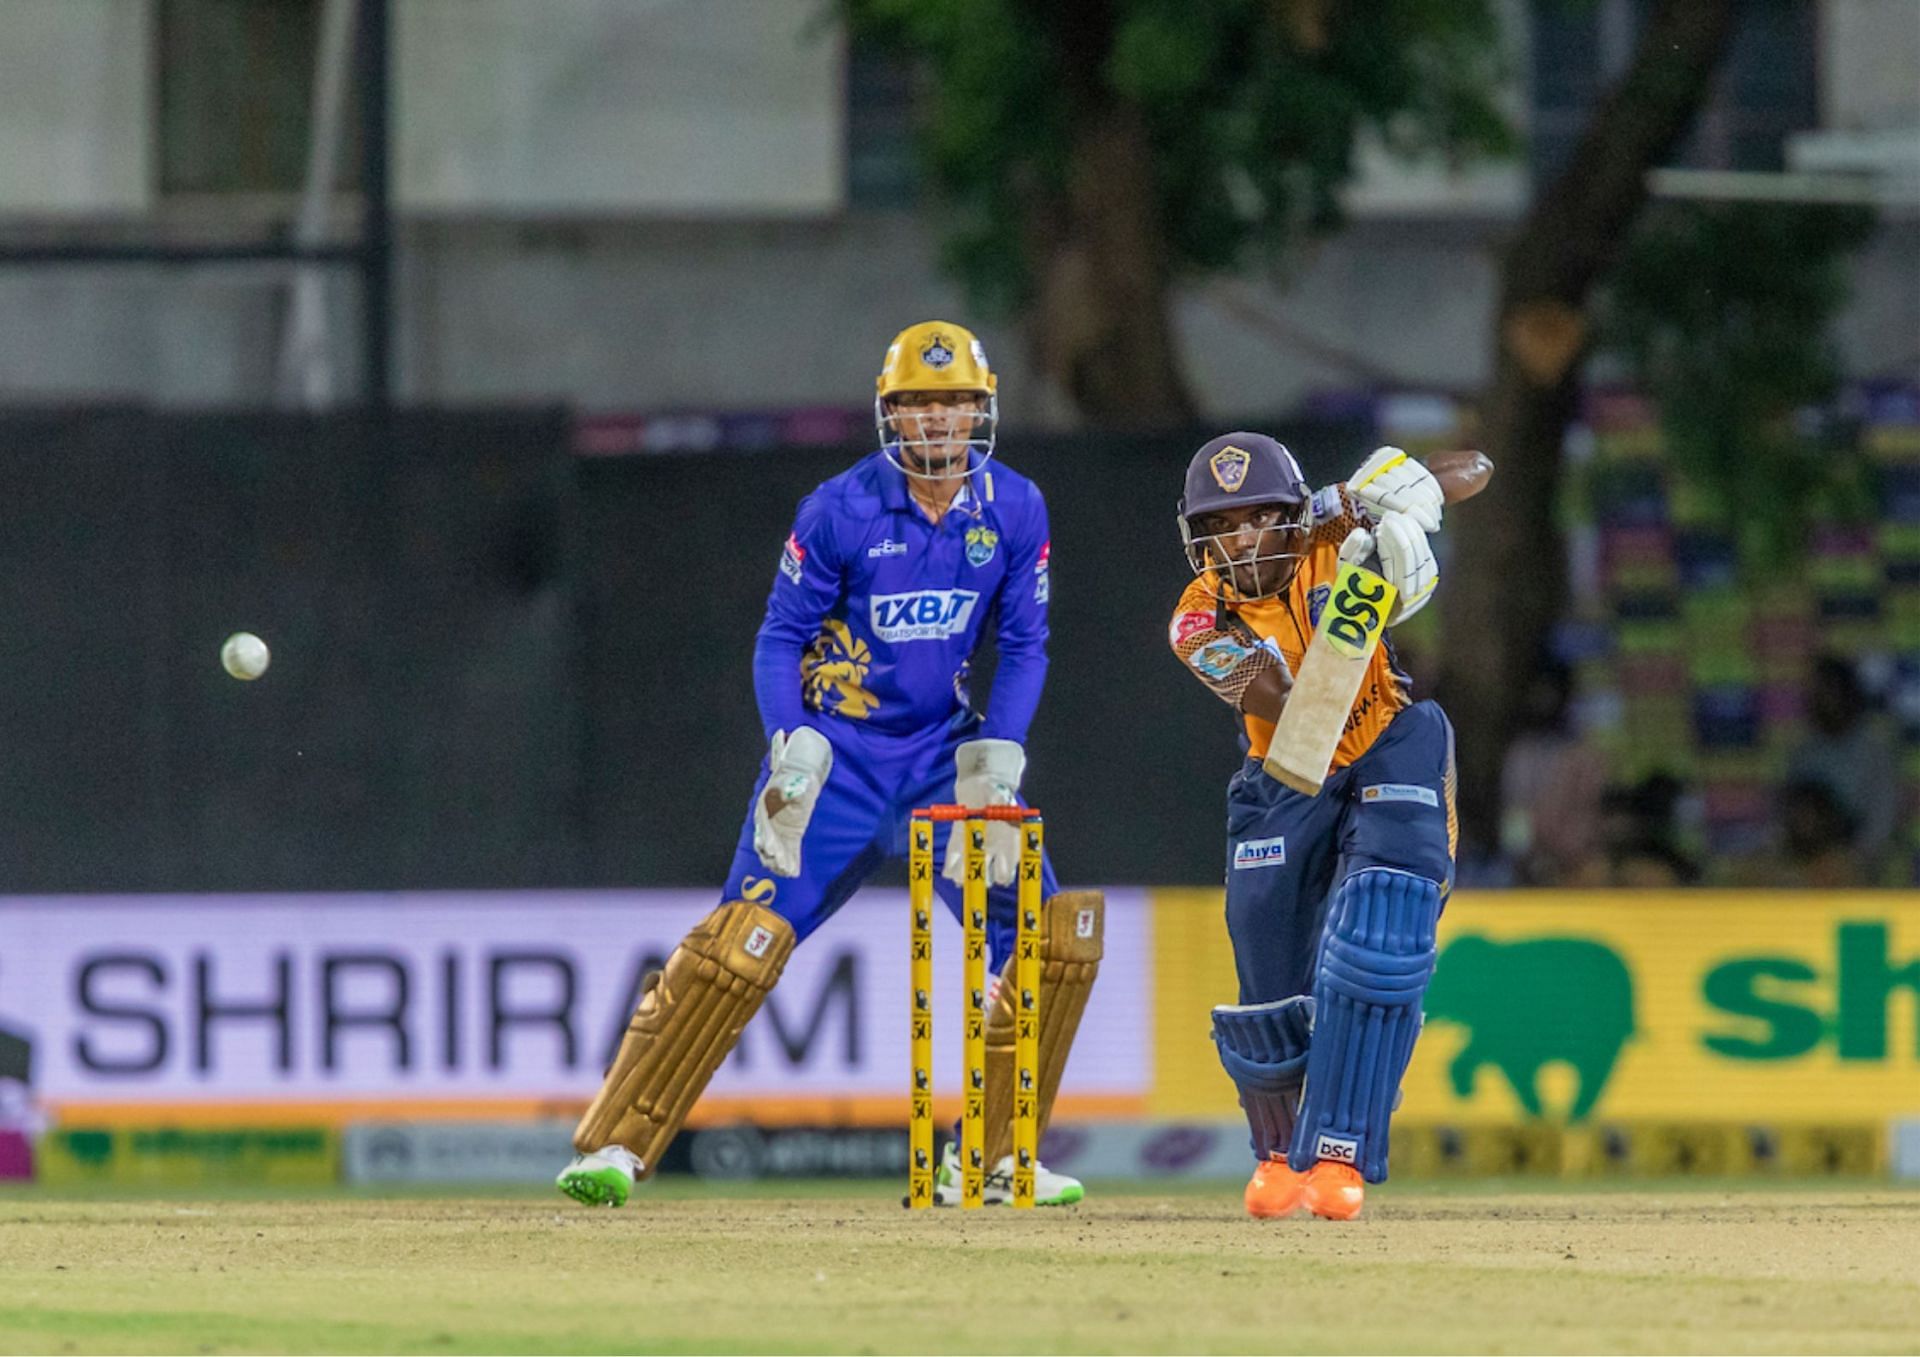 A strong player through the off-side, the skilful Ajitesh backs it with belief in his ability (Picture Credits: tnpl.cricket).